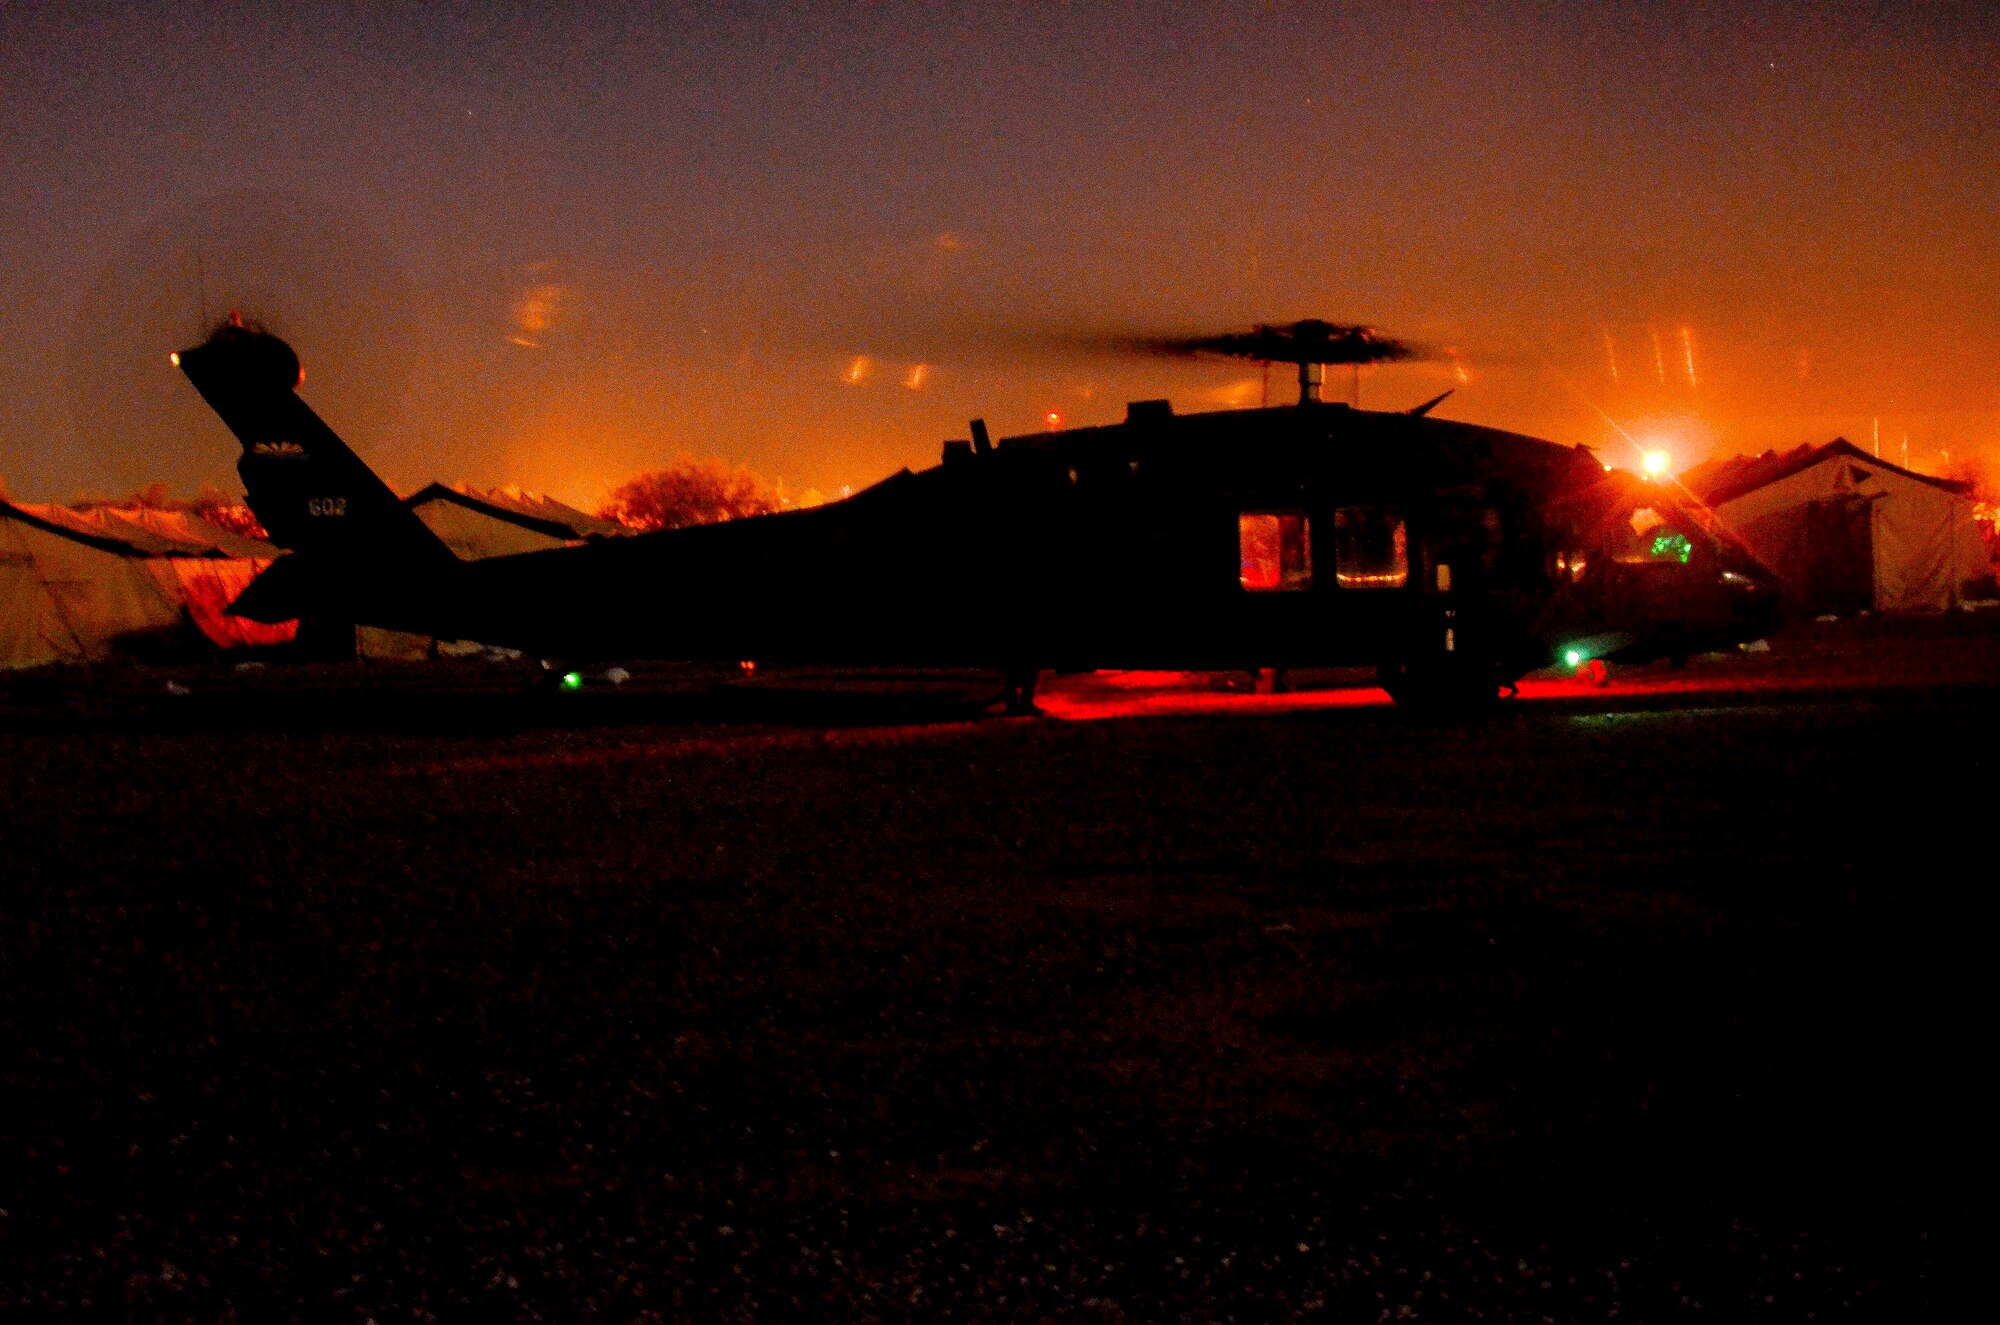 A UH-60 Black Hawk helicopter conducts refueling at a Forward Arming and Refueling Point during a training mission in Exercise ANGEL THUNDER on May 14, 2014 at the Florence Military Reservation, Ariz. ANGEL THUNDER 2014 is the largest and most realistic joint service, multinational, interagency combat search and rescue exercise designed to provide training for personnel recovery assets using a variety of scenarios to simulate deployment conditions and contingencies. Personnel recovery forces will train through the full spectrum of personnel recovery capabilities with ground recovery personnel, air assets, and interagency teams. (U.S. Air Force photo by Staff Sgt. Adam Grant/Released)